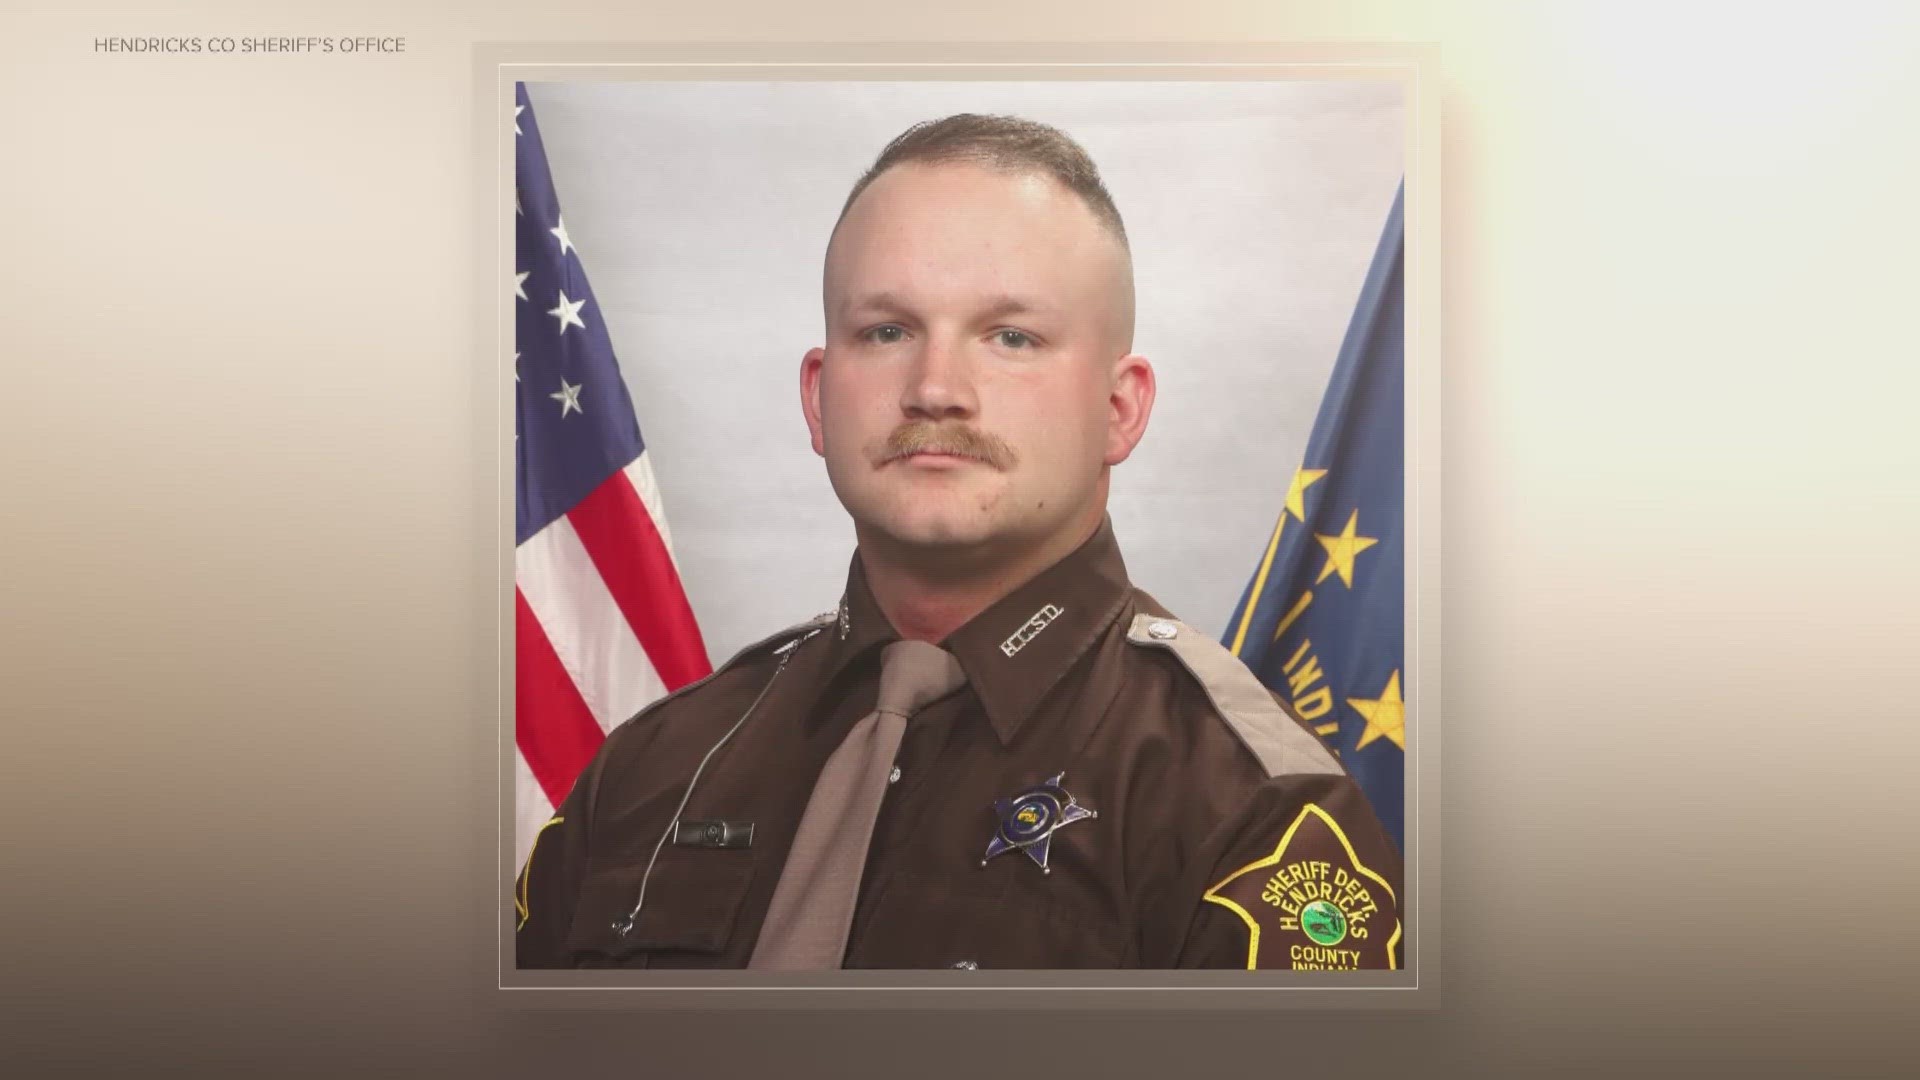 Those who knew a Hendricks County sheriff's deputy who died while responding to a crash late Monday are mourning his loss and celebrating his life.